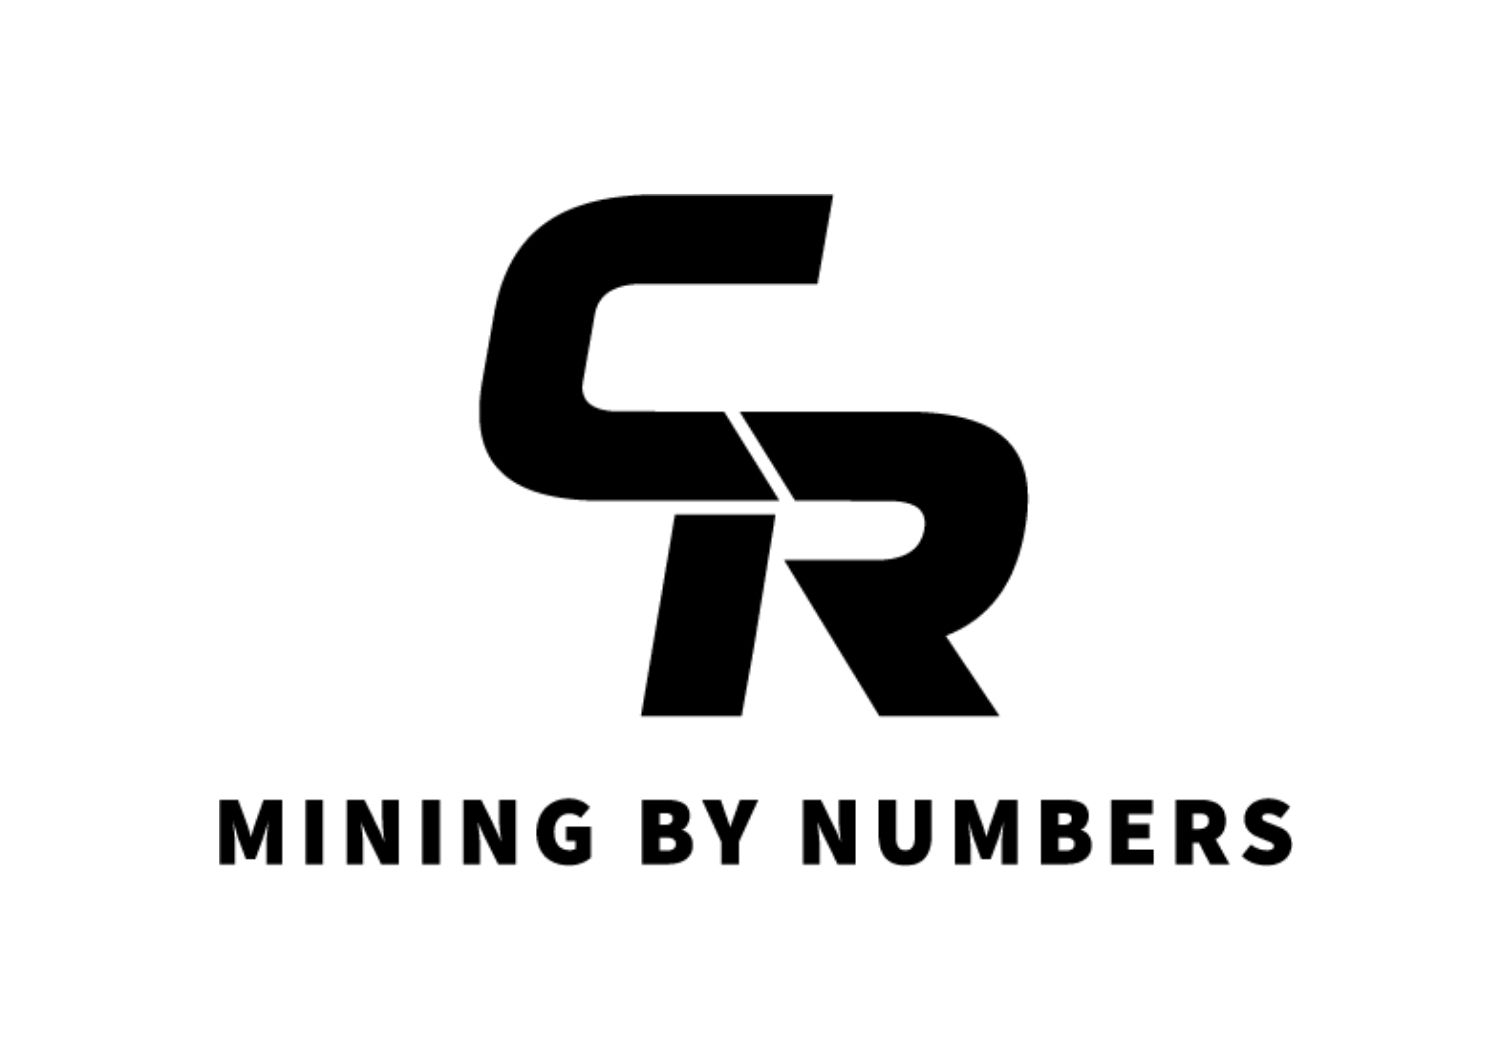 CR Mining by Numbers Logo